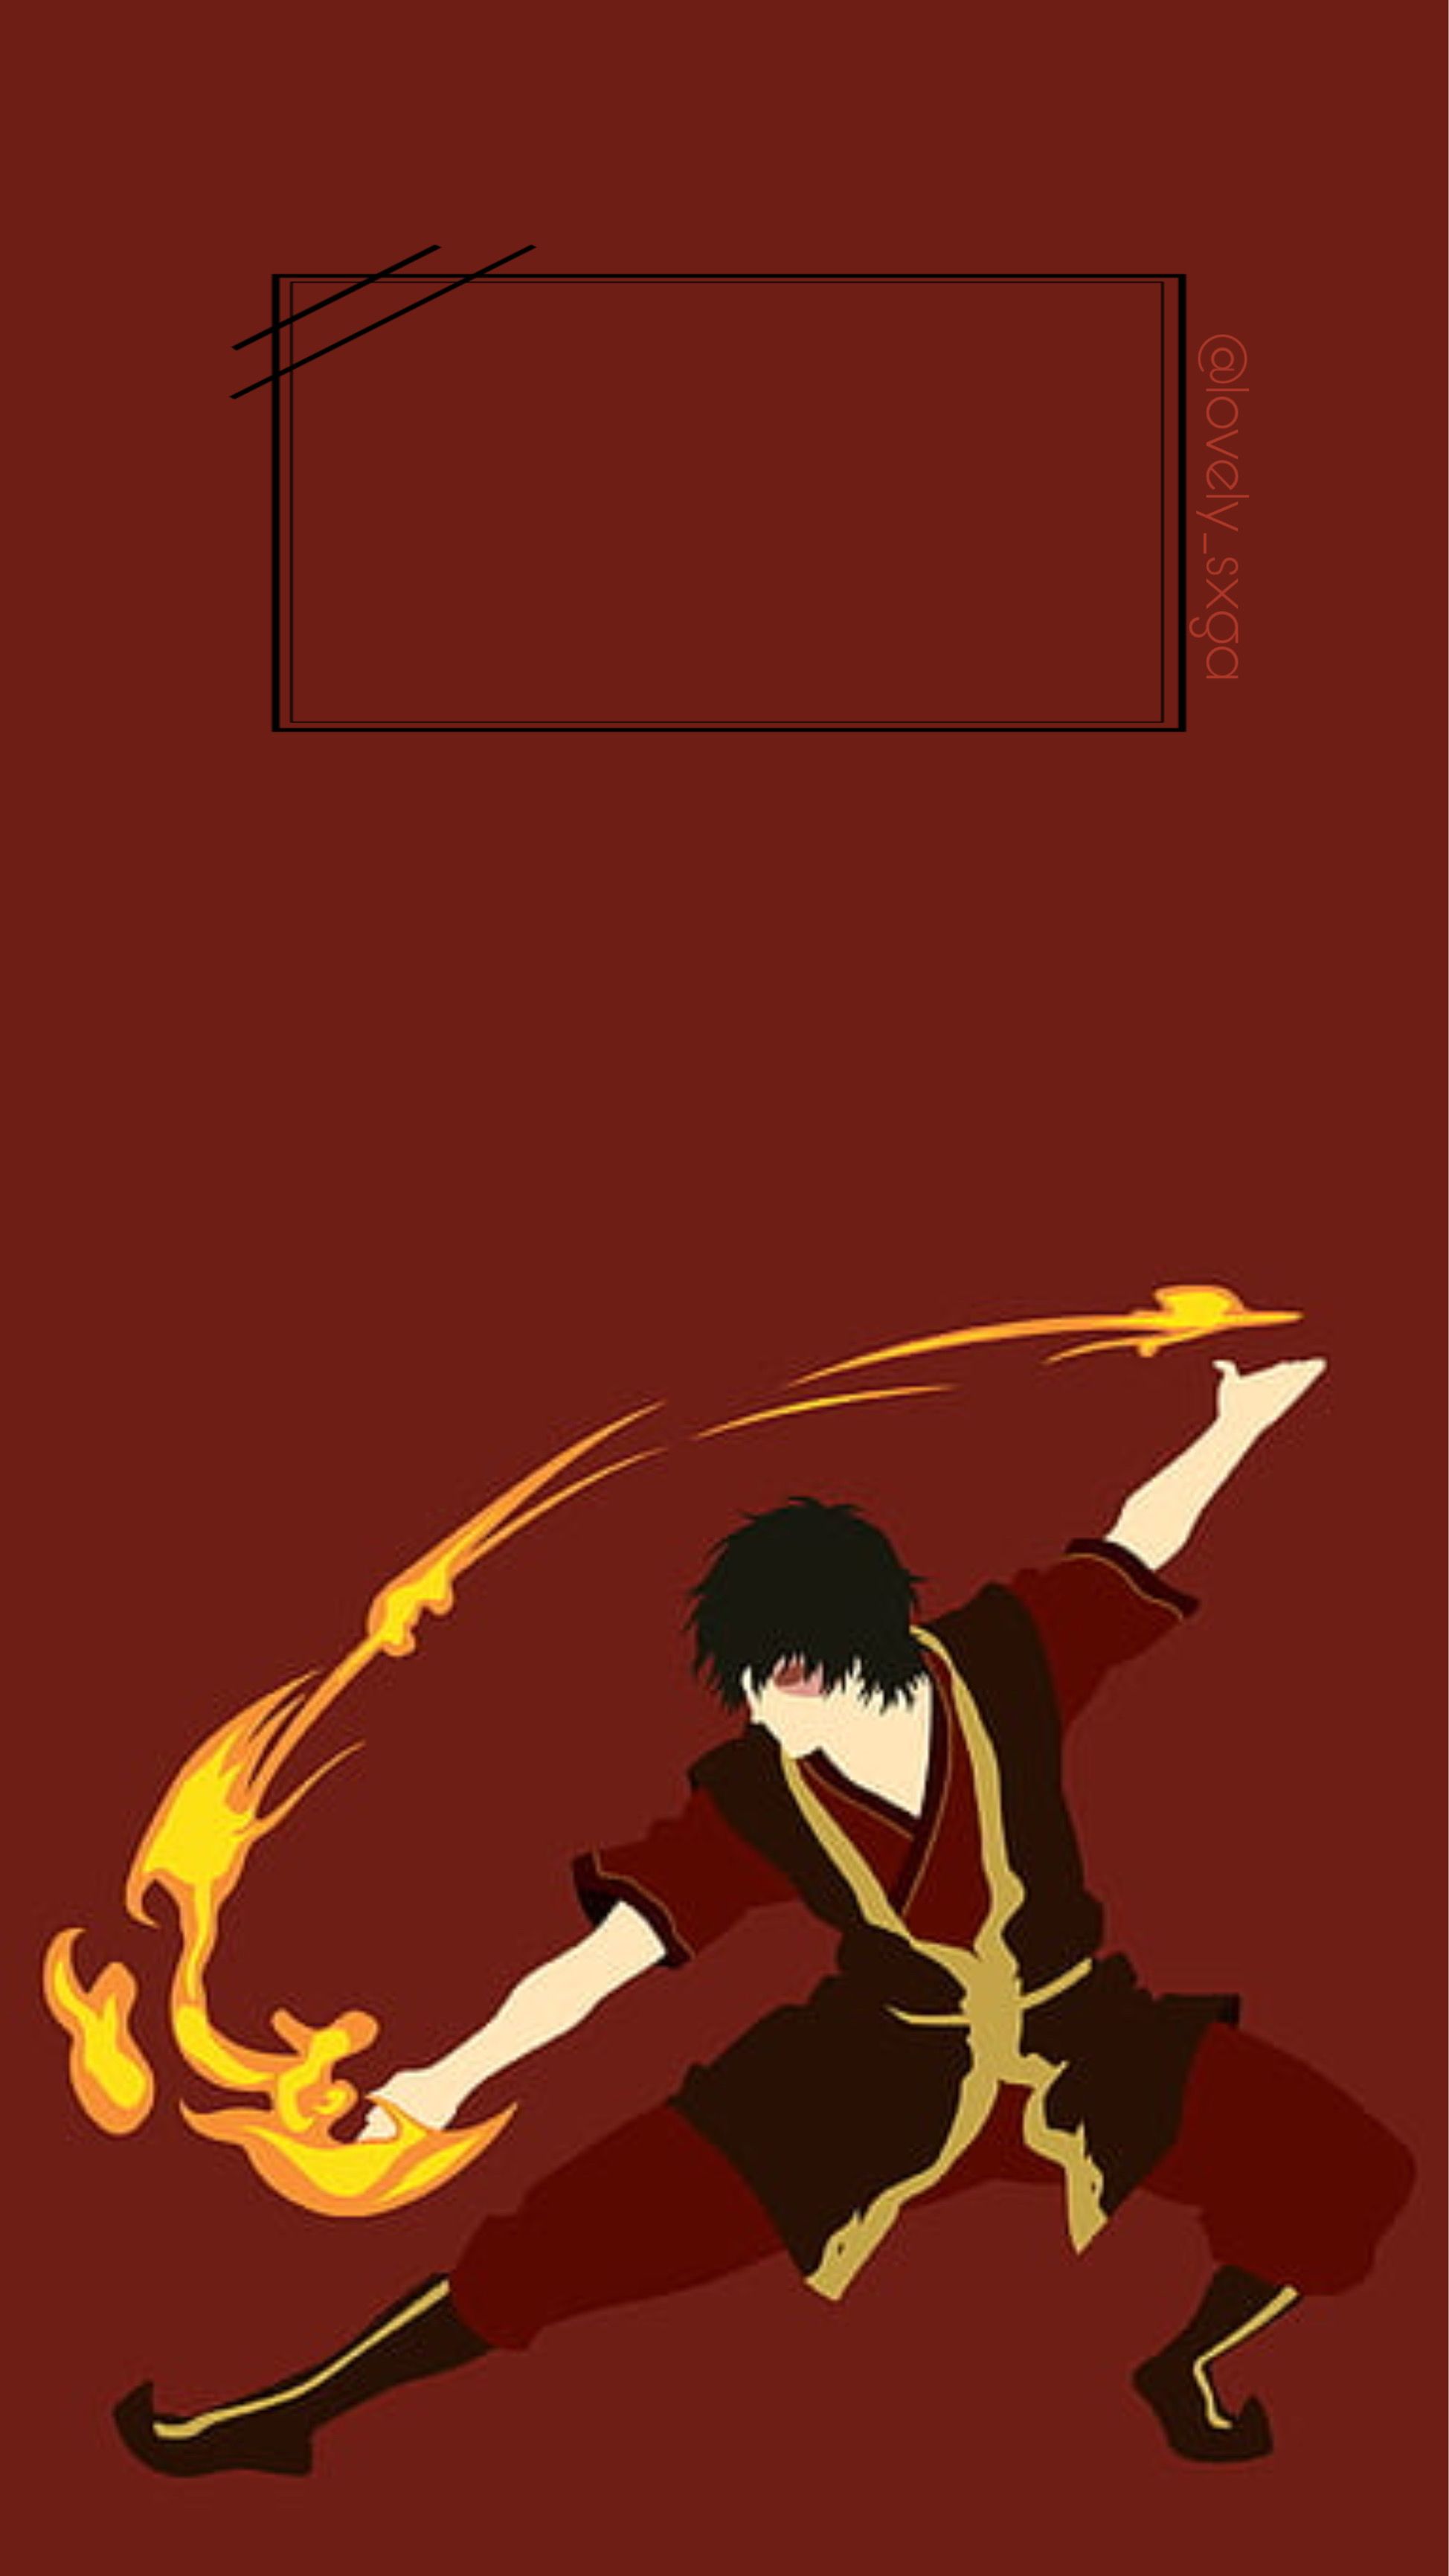 avatar thelastairbender Image by